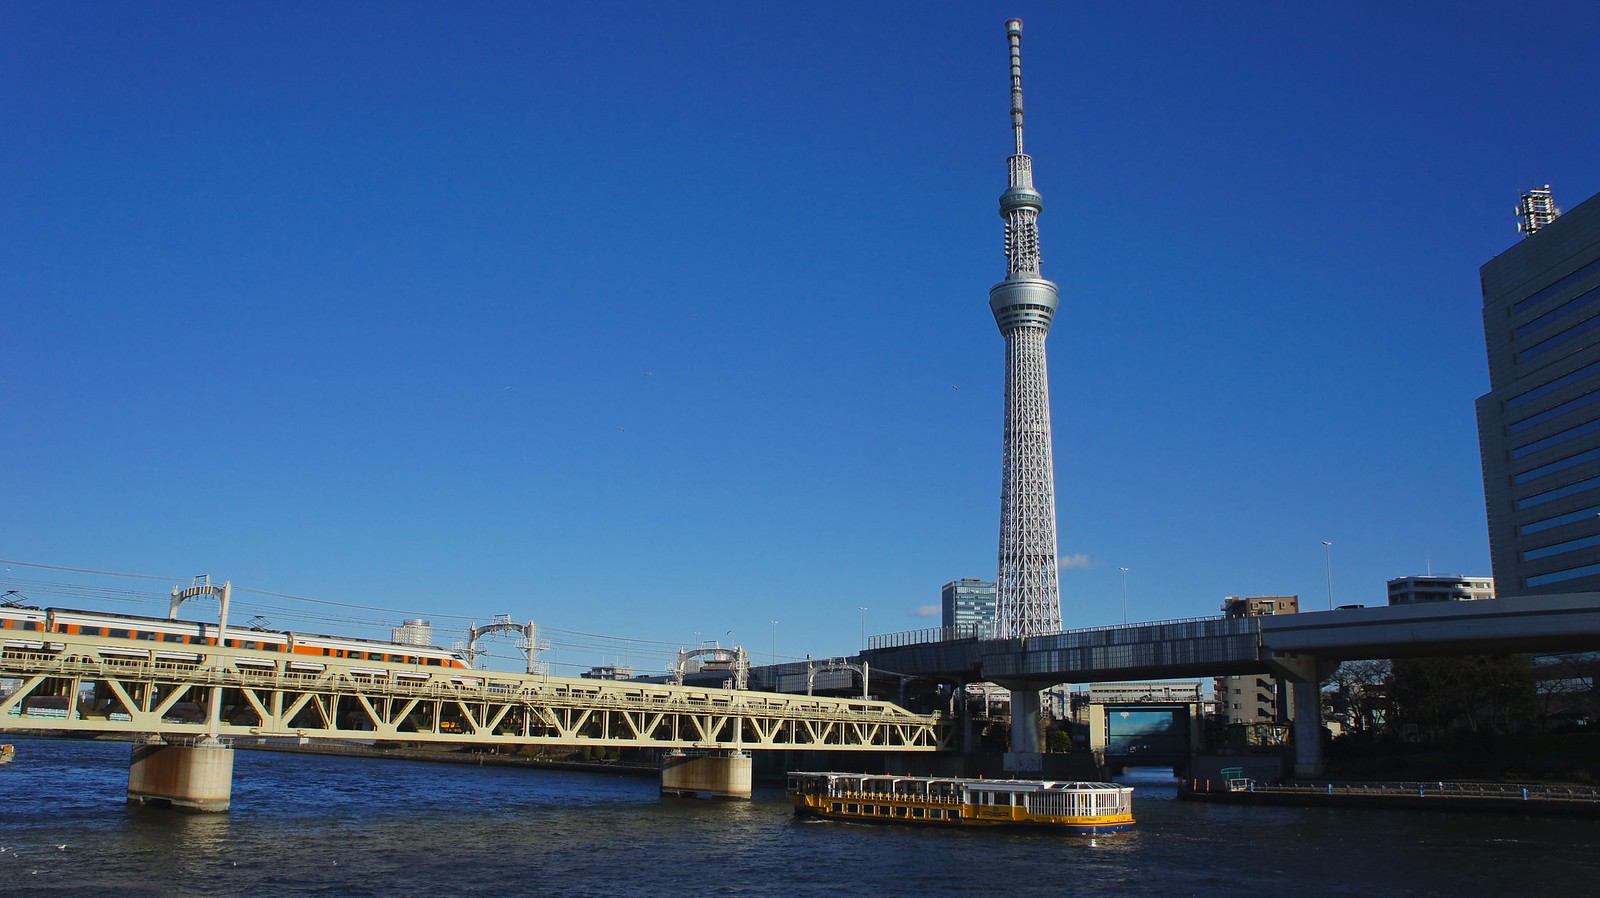 View of Skytree from the Tully's Coffee Cafe on banks of Sumida River